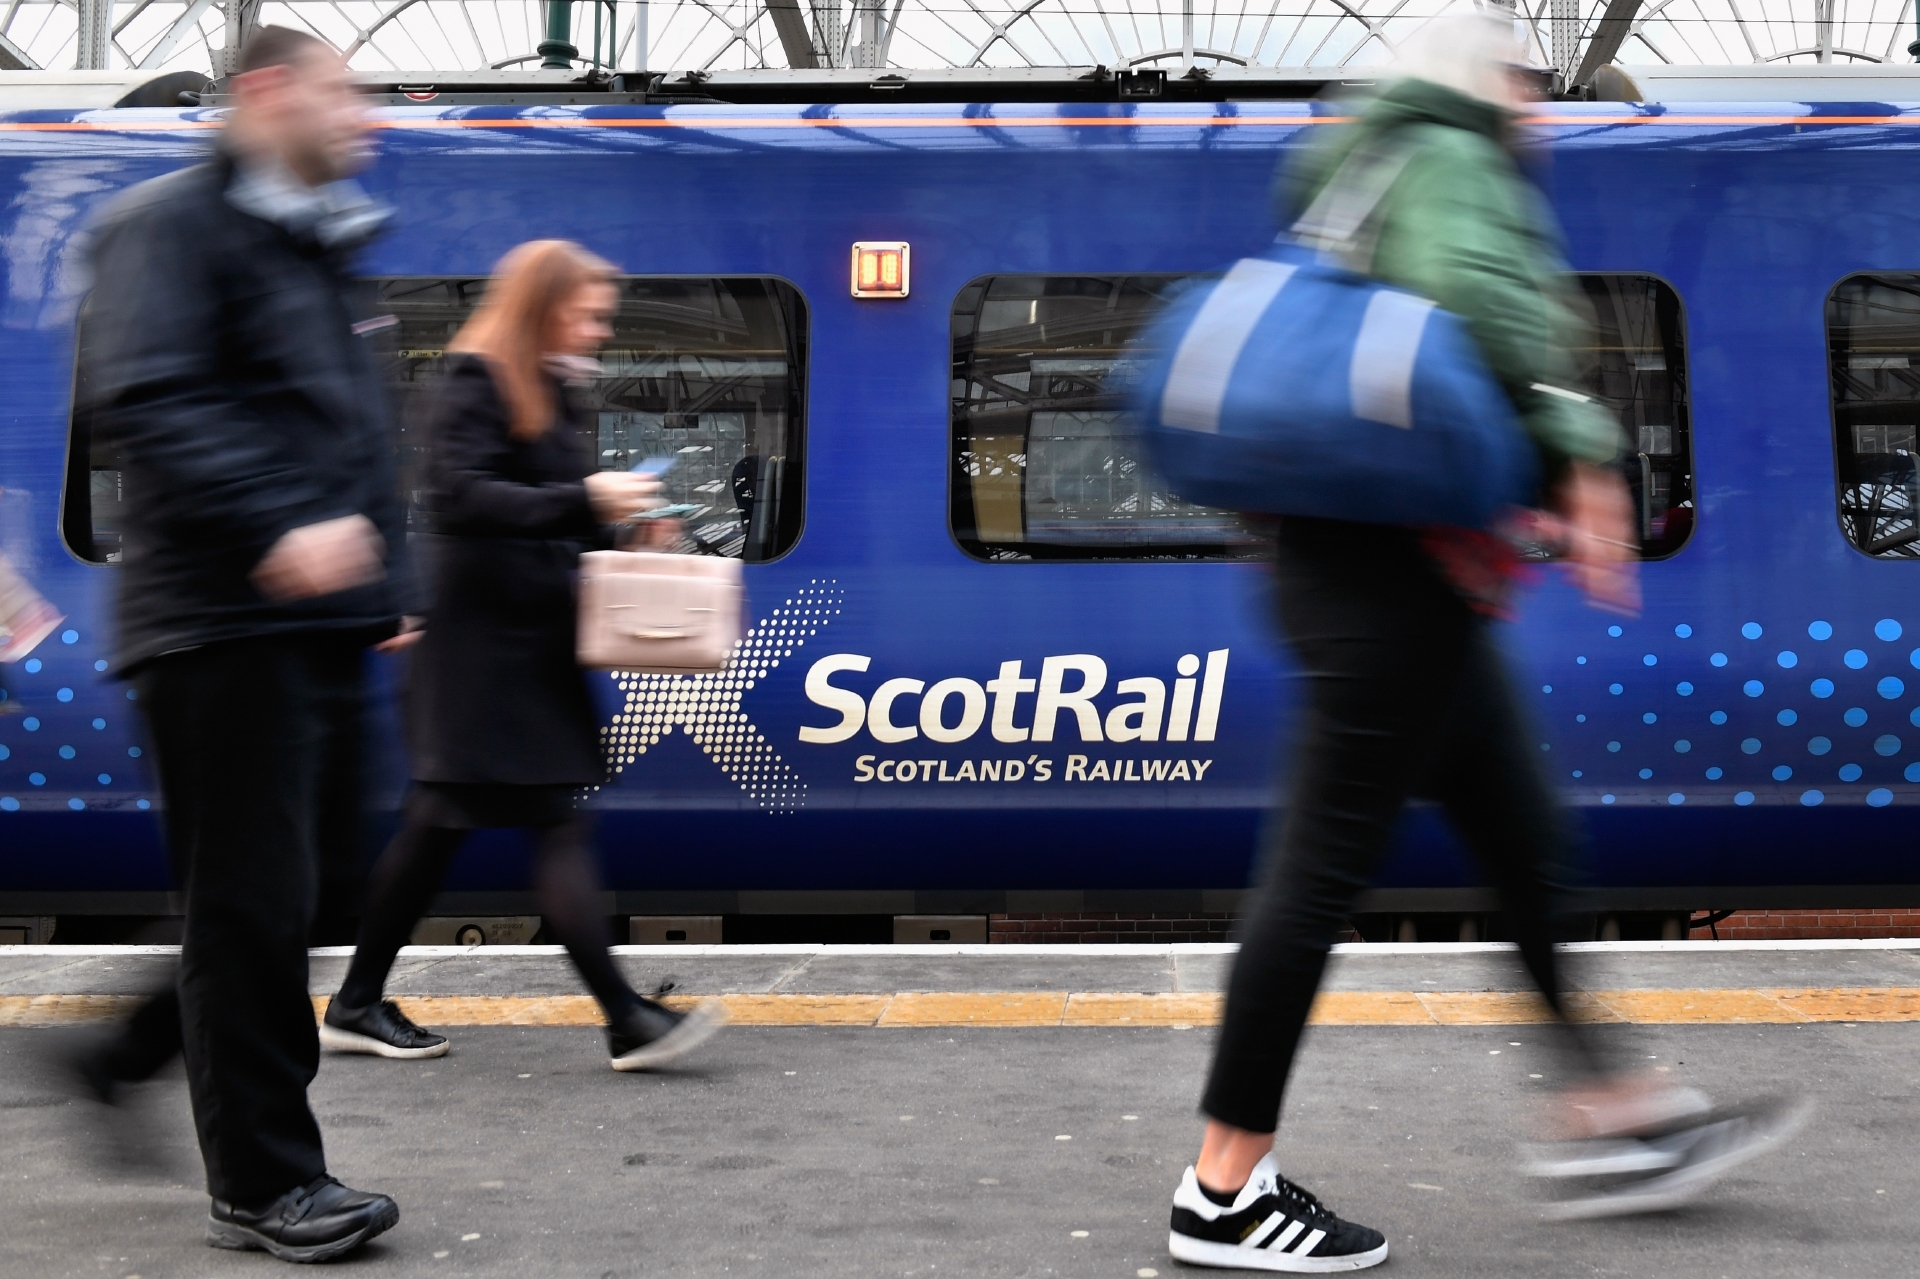 Fife passengers pay 56% more than their Belgian counterparts for the same-length commute.